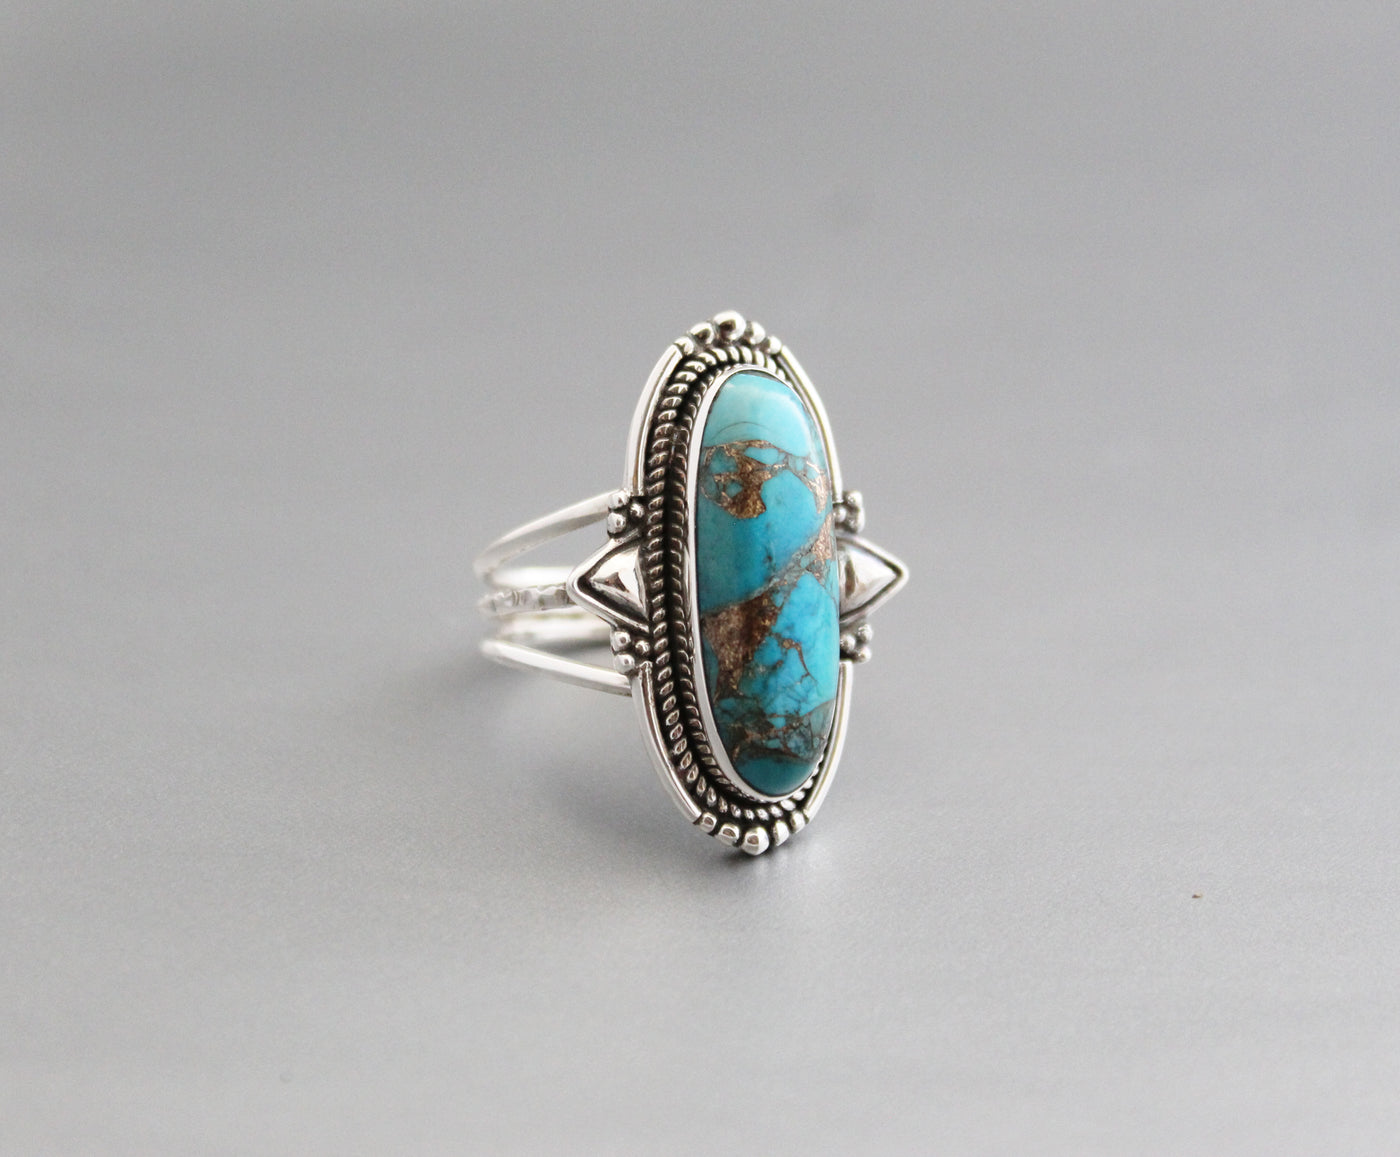 Copper Turquoise Ring, Natural Gemstone, Silver Turquoise Jewelry, Handmade Jewelry, December Birthstone, Everyday Rings, Delicate Rings